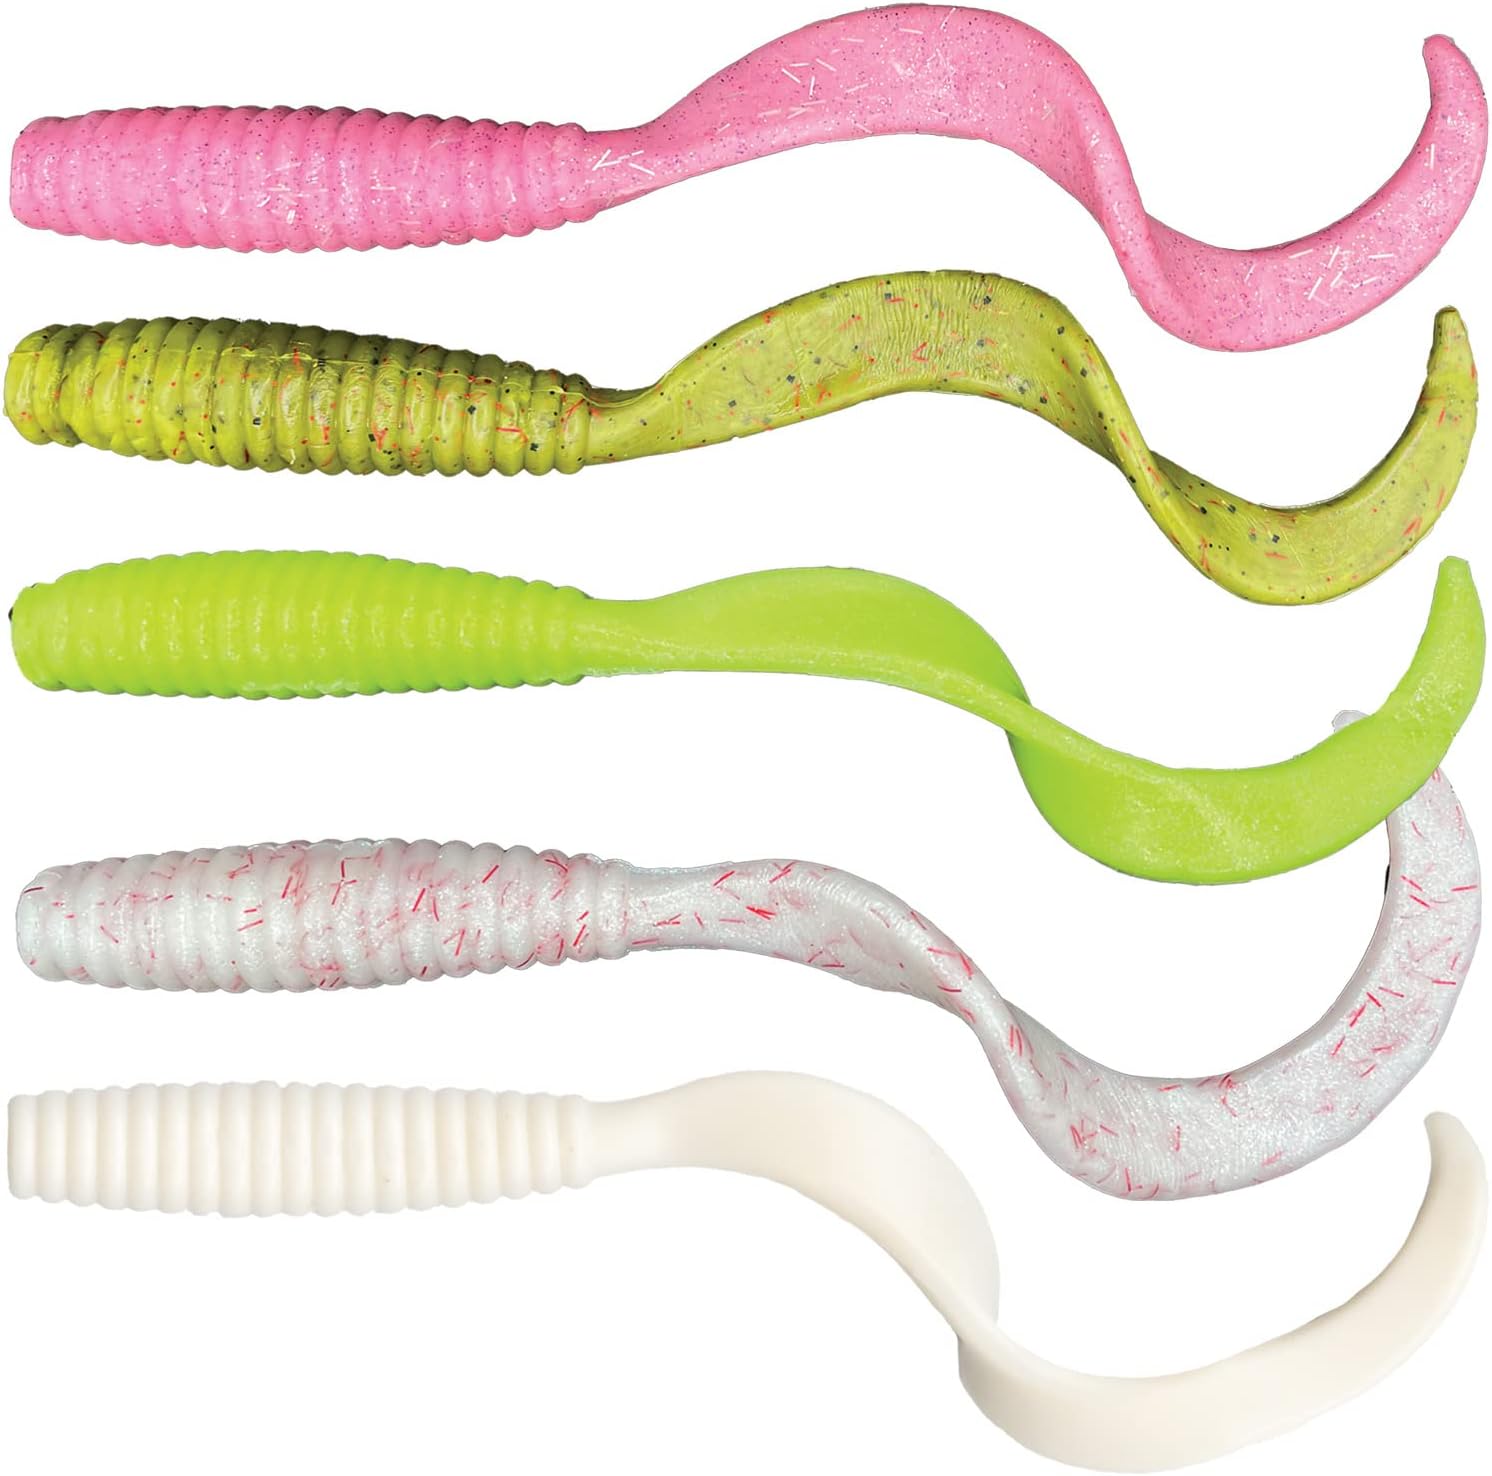 Product Review: Fishbites 6-Inch Grub - The Fisherman